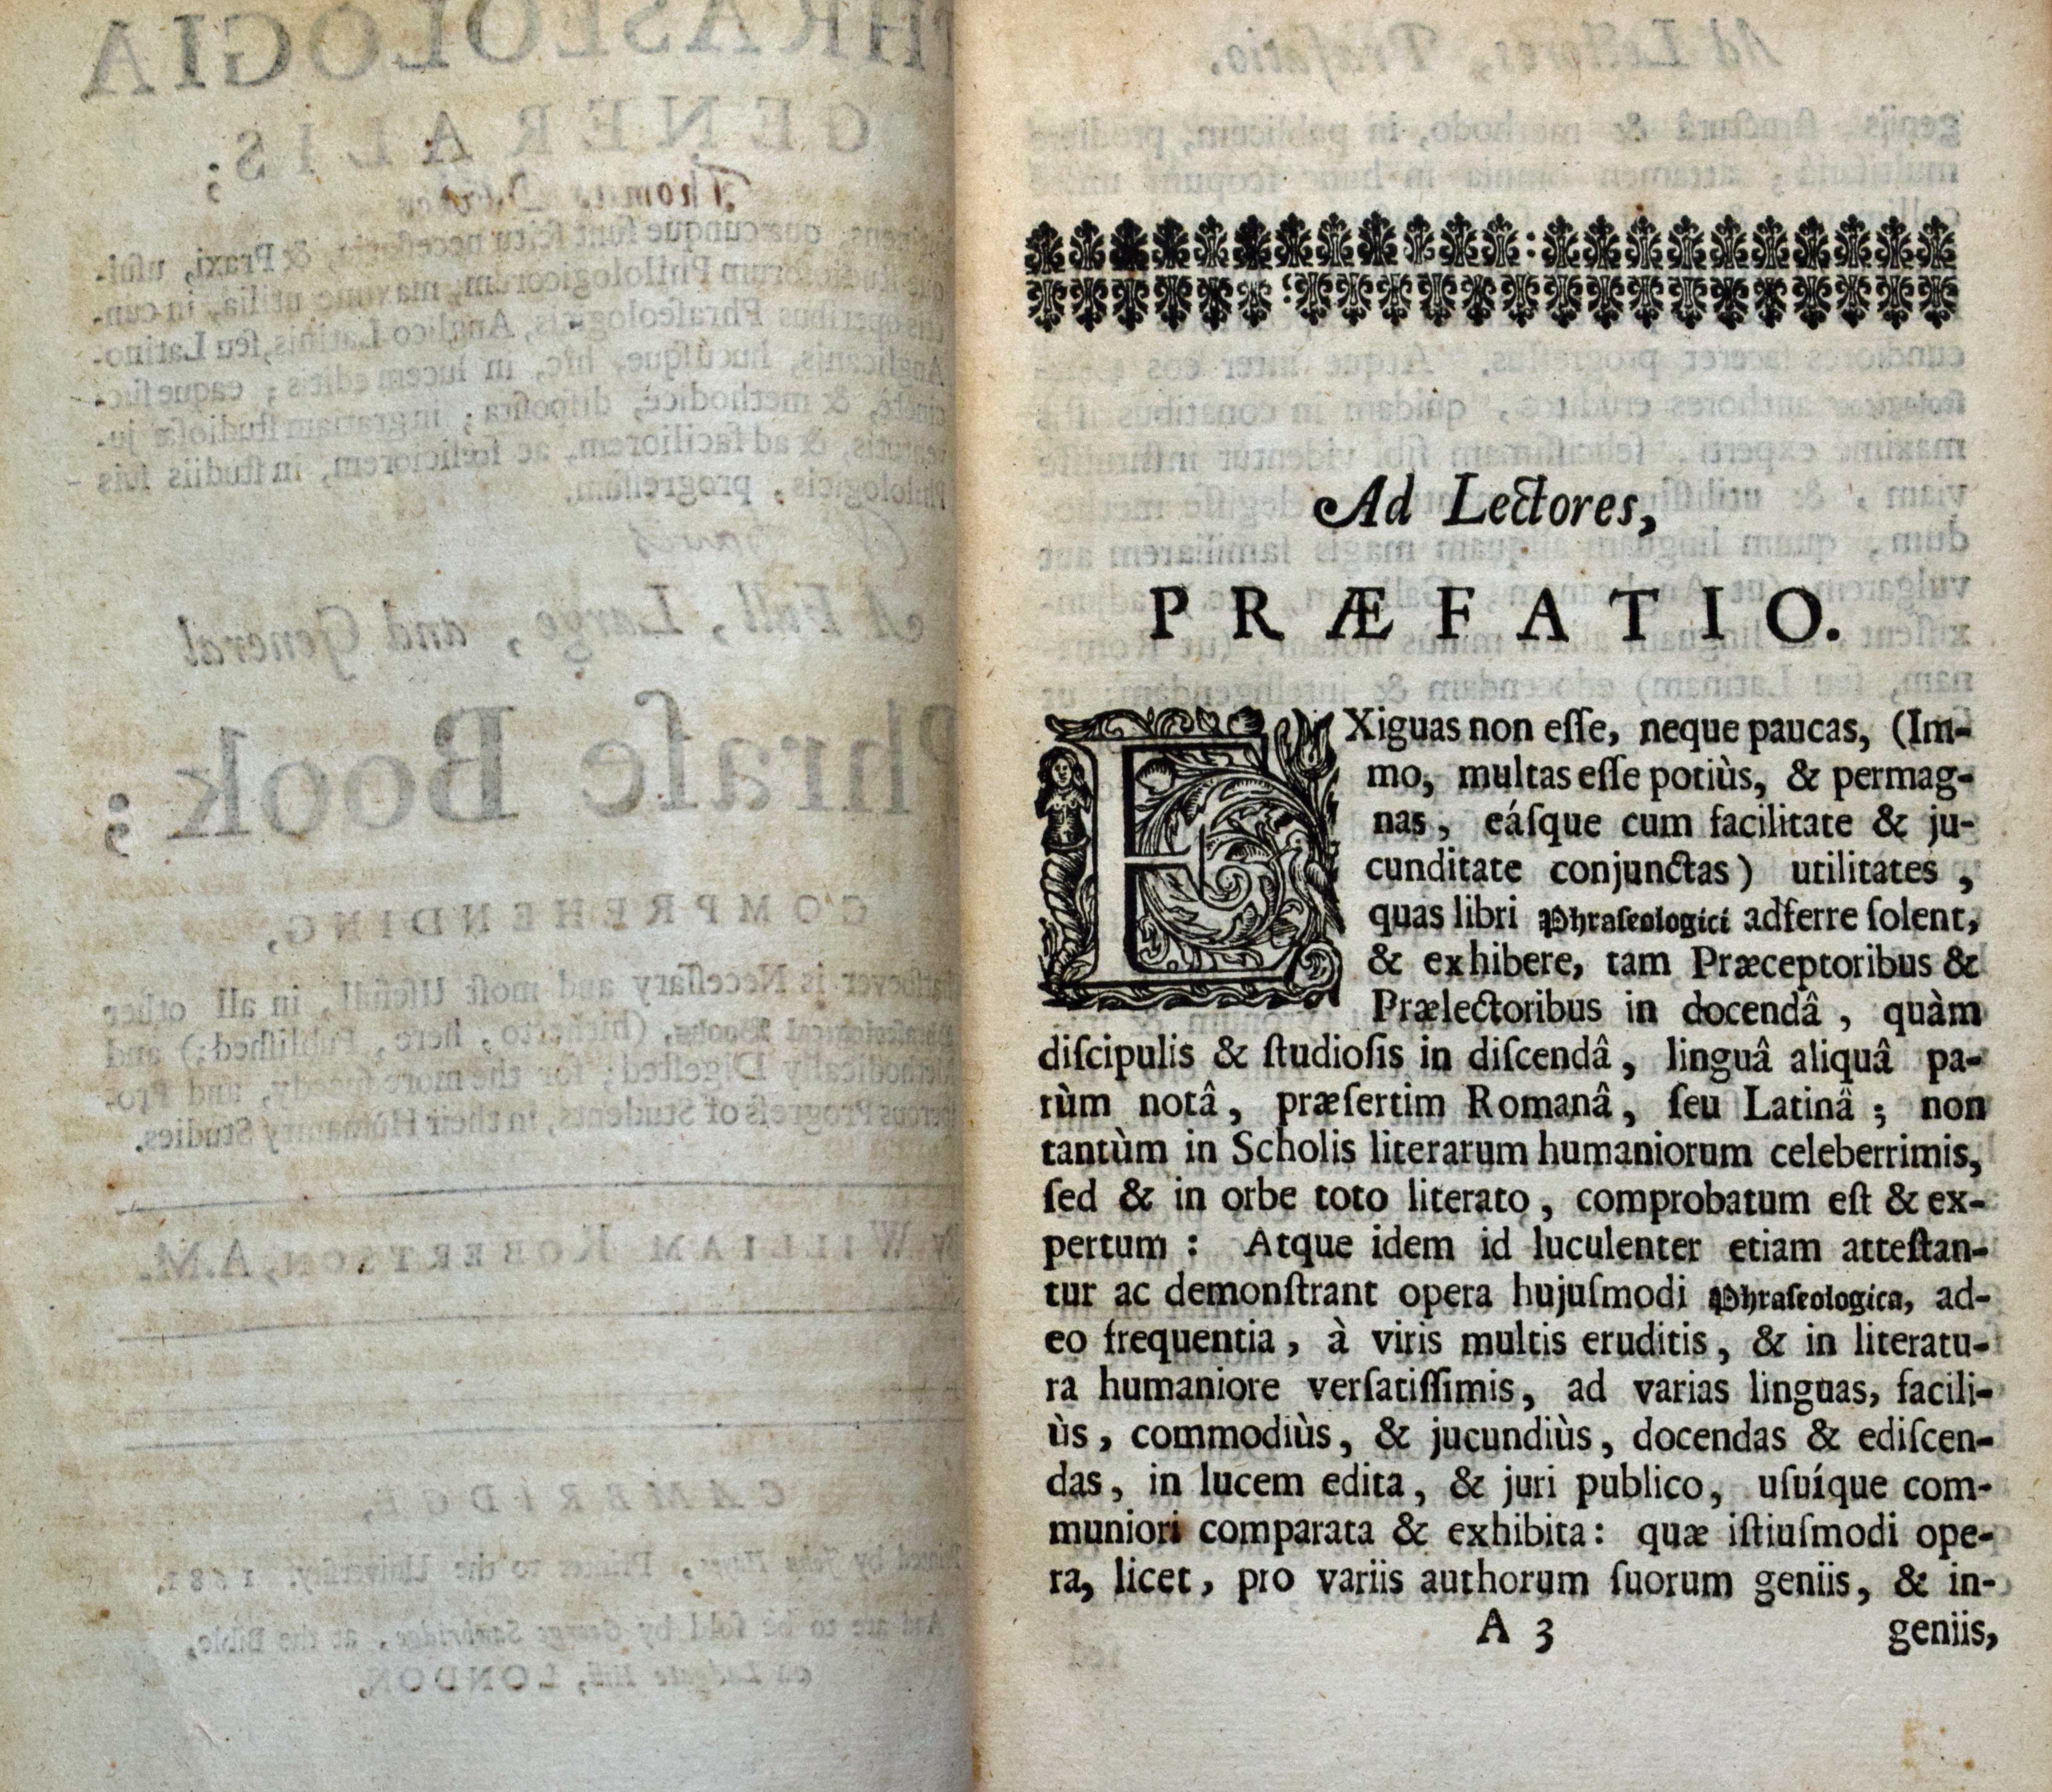 Phraseologia Generalis. A Full, Large and General Phrasebook. Comprehending Whatsoever is Necessary and Most Useful, etc.